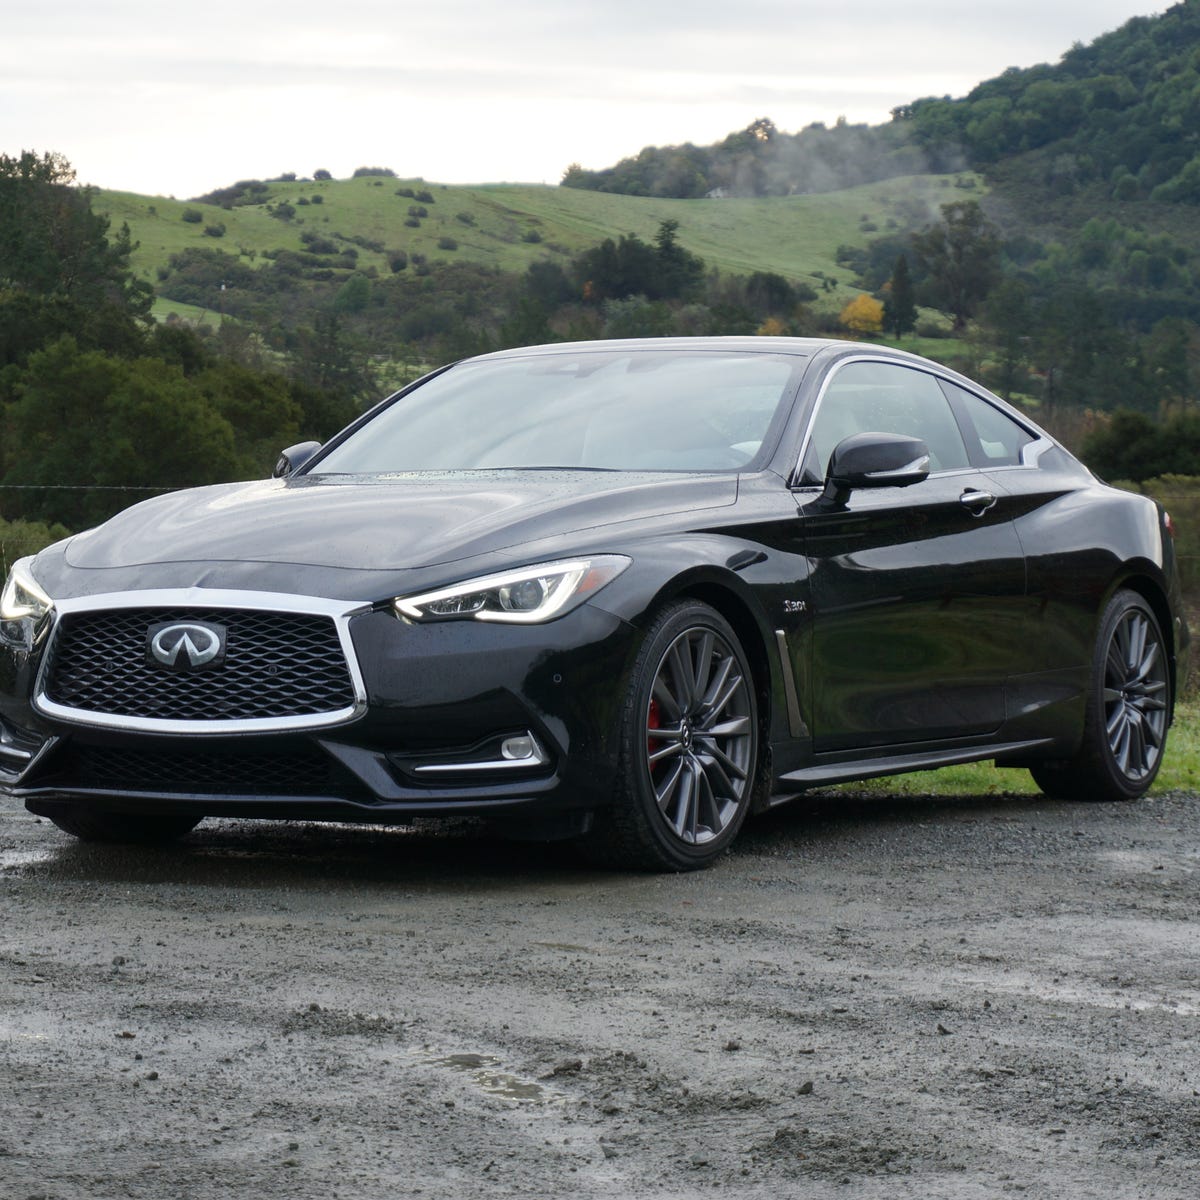 2017 Infiniti Q60 Red Sport 400: A gorgeous sports coupe - CNET